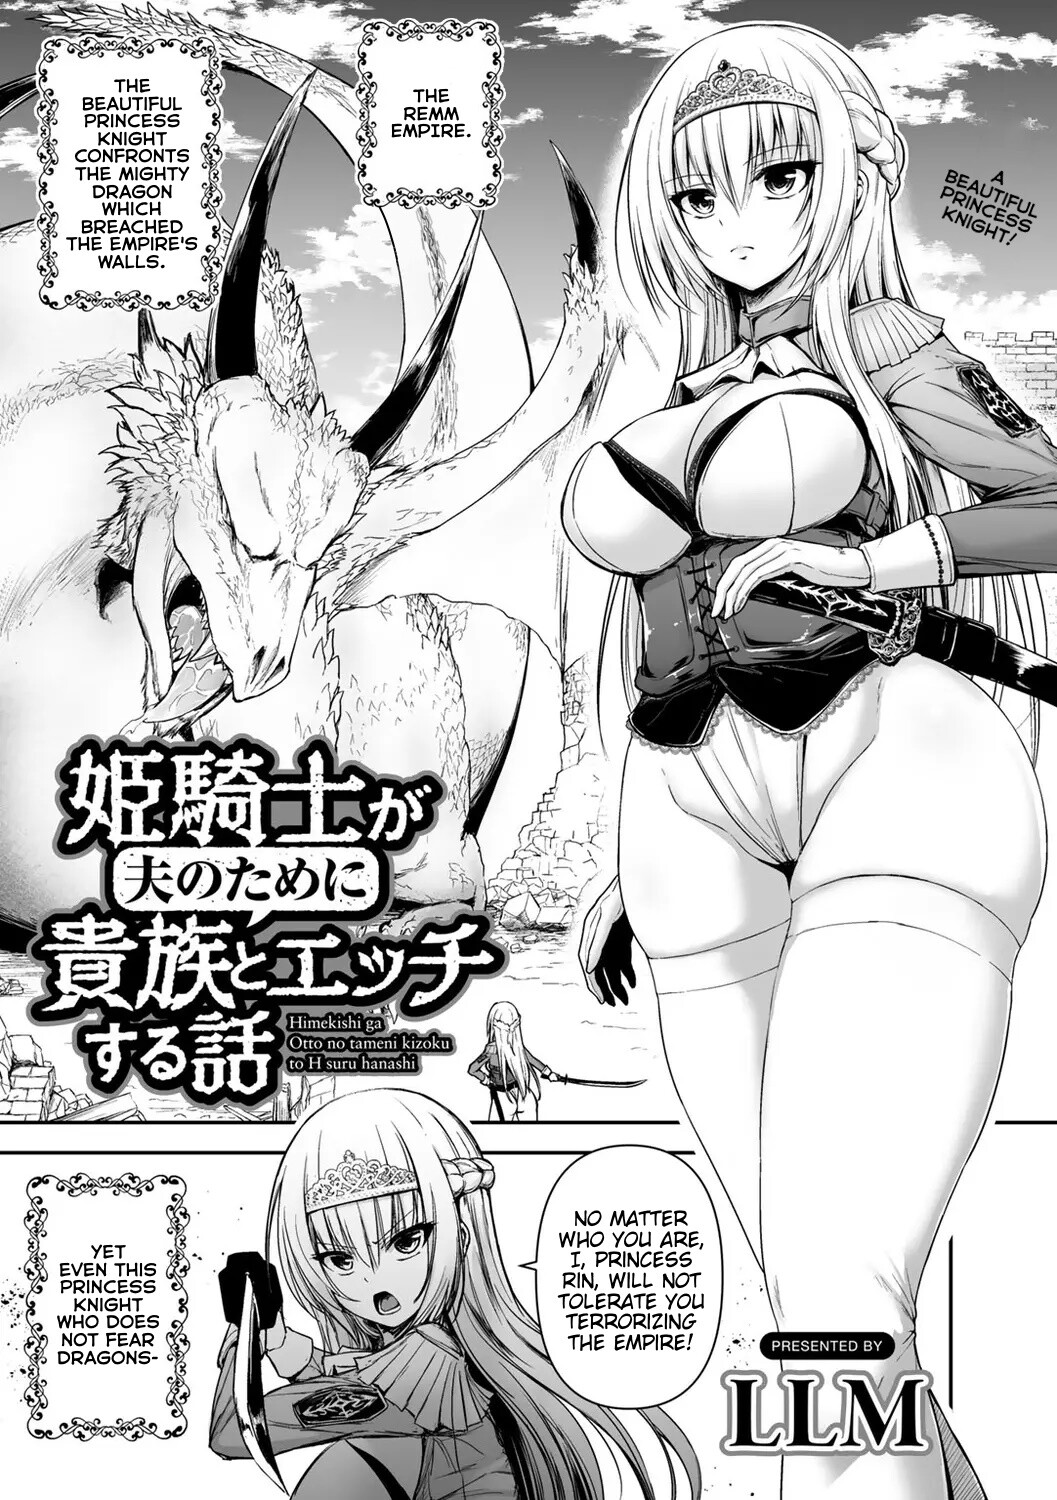 Hentai Manga Comic-A Story About a Princess Knight Having Sex With a Nobleman For Her Husband-Read-1